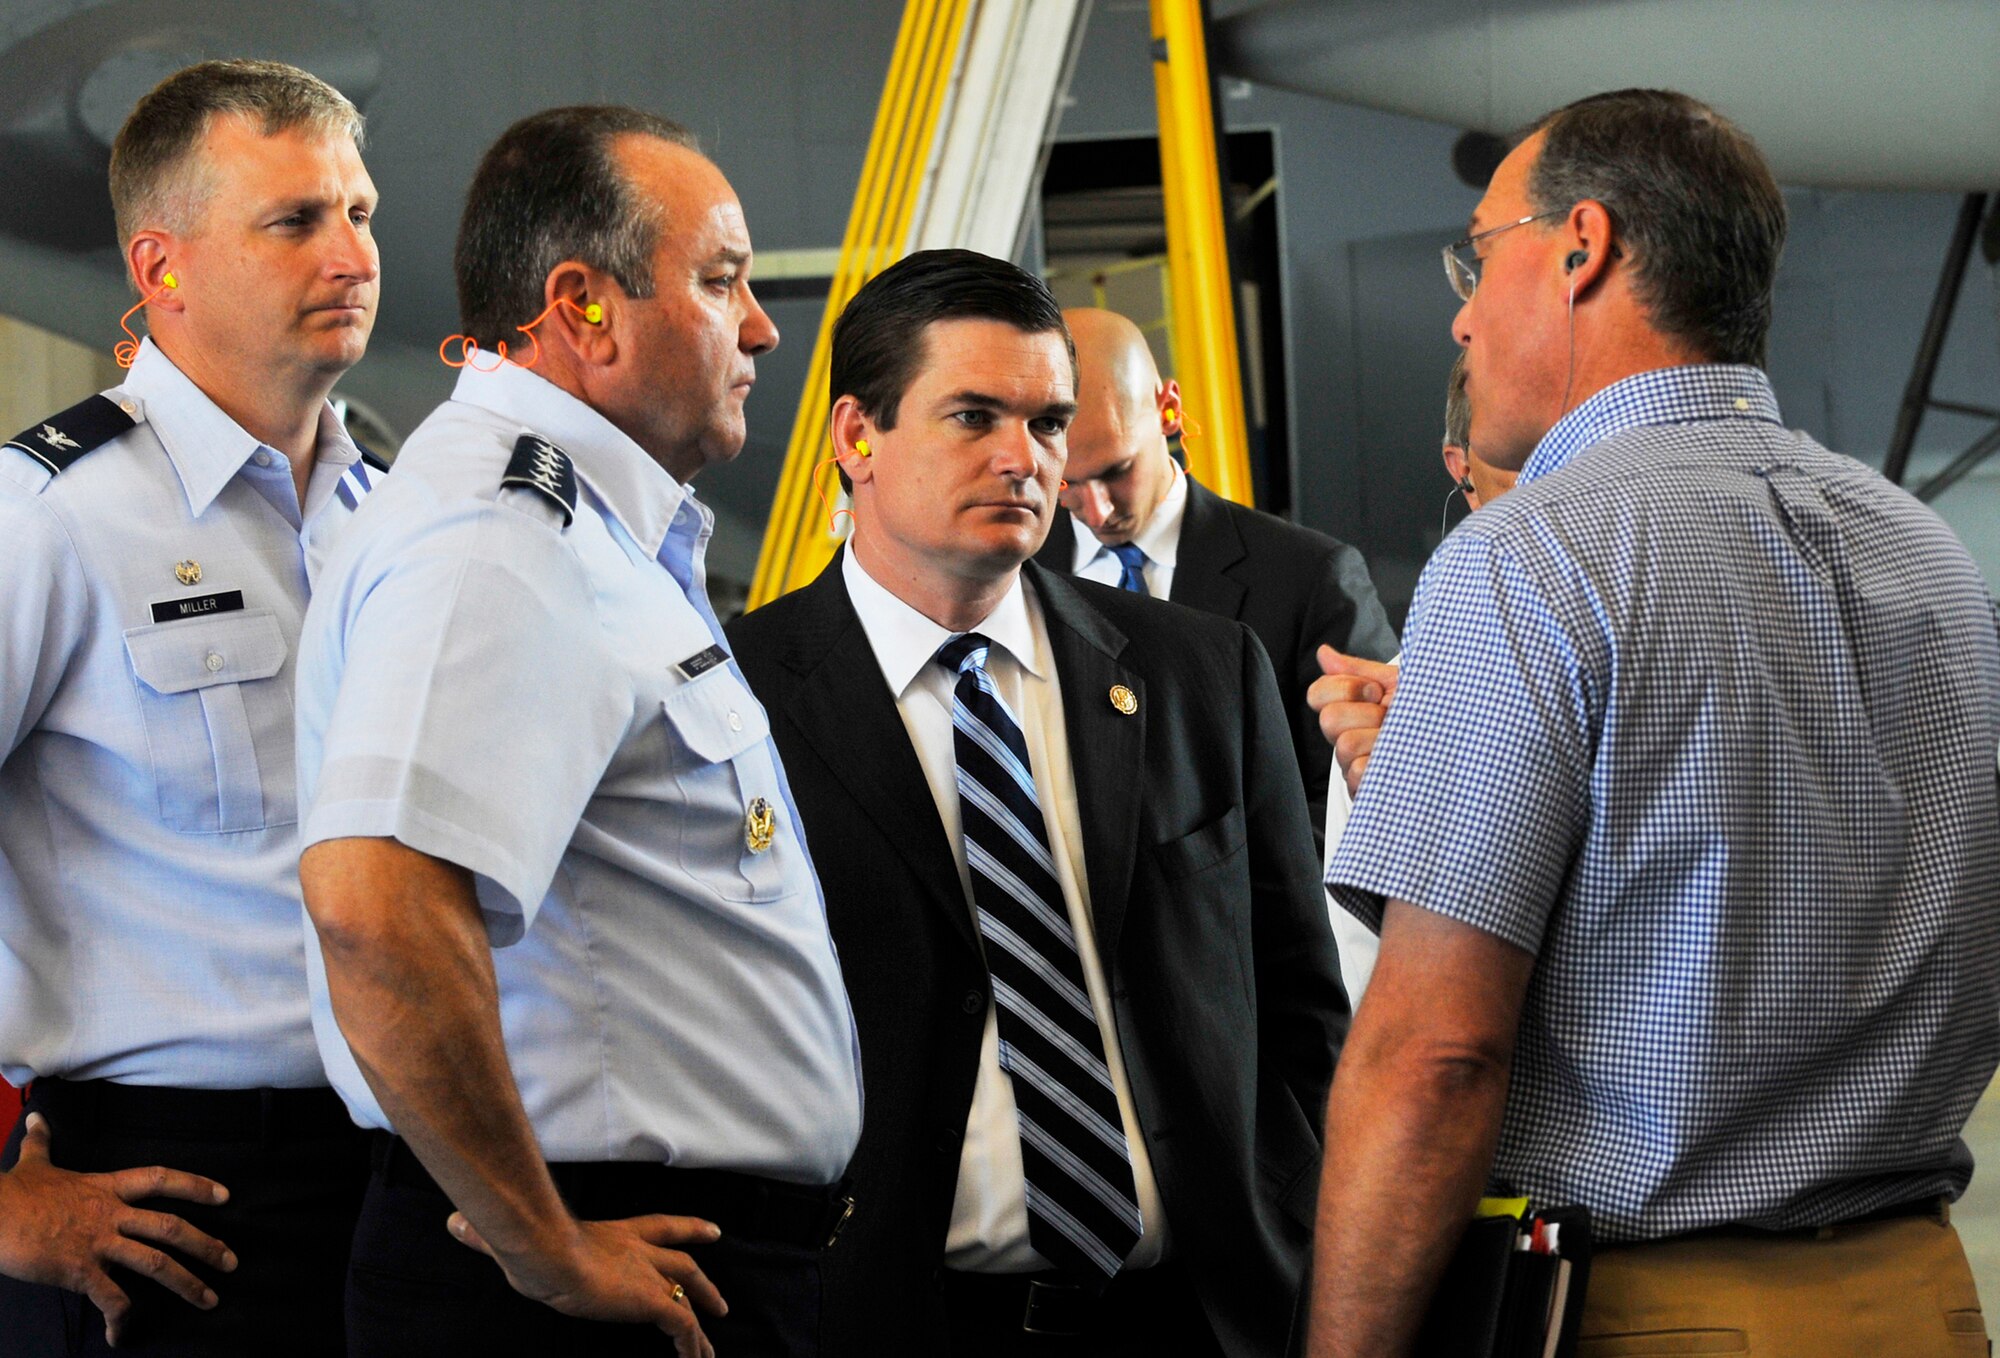 L-R, Col. Evan Miller, 402nd Maintenance Wing commander; Air Force Vice Chief of Staff Gen. Phil Breedlove; and U.S. Rep. Austin Scott, (R-Ga.) listen to a briefing by Richard Frey, 560th Aircraft Maintenance Squadron director, at the C-130 High Velocity Maintenance Hangar. The visit on Monday also included a tour of the E-8C Joint STARS area, the 689th Combat Communications Wing and Headquarters Air Force Reserve Command. ( U. S. Air Force photo by Sue Sapp)